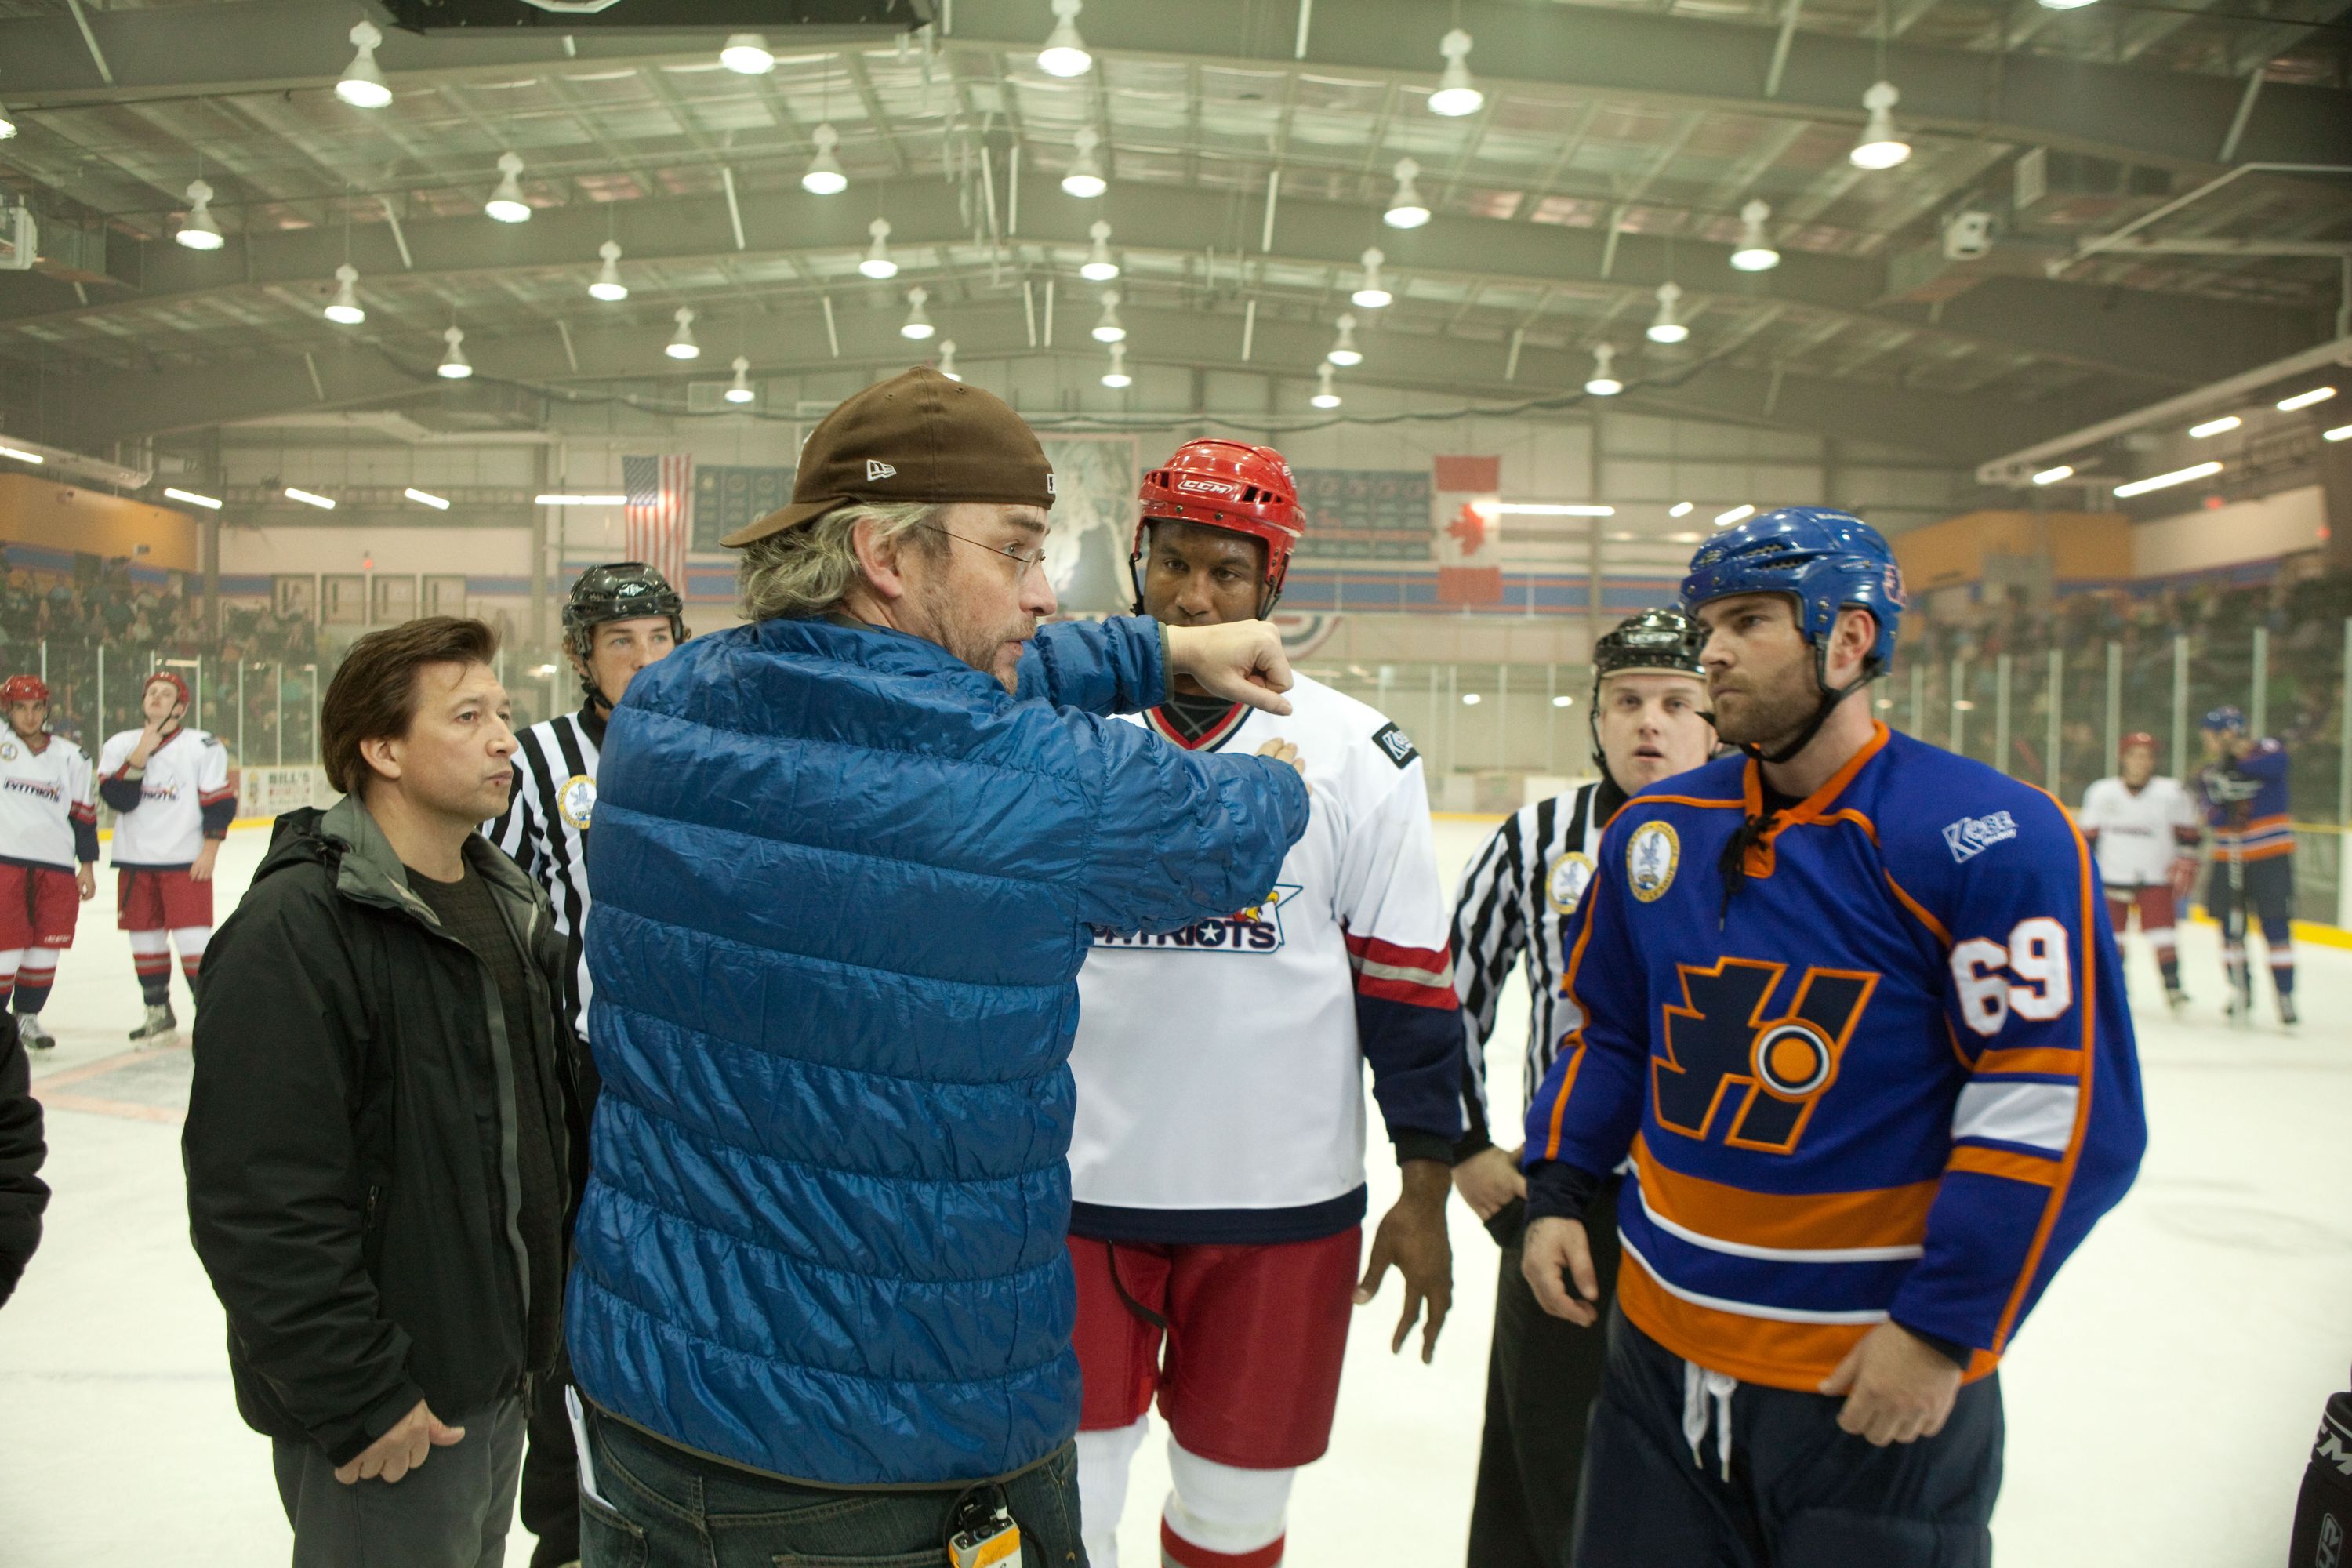 Director Dowse aims for the bleachers with hockey comedy Goon | The ...